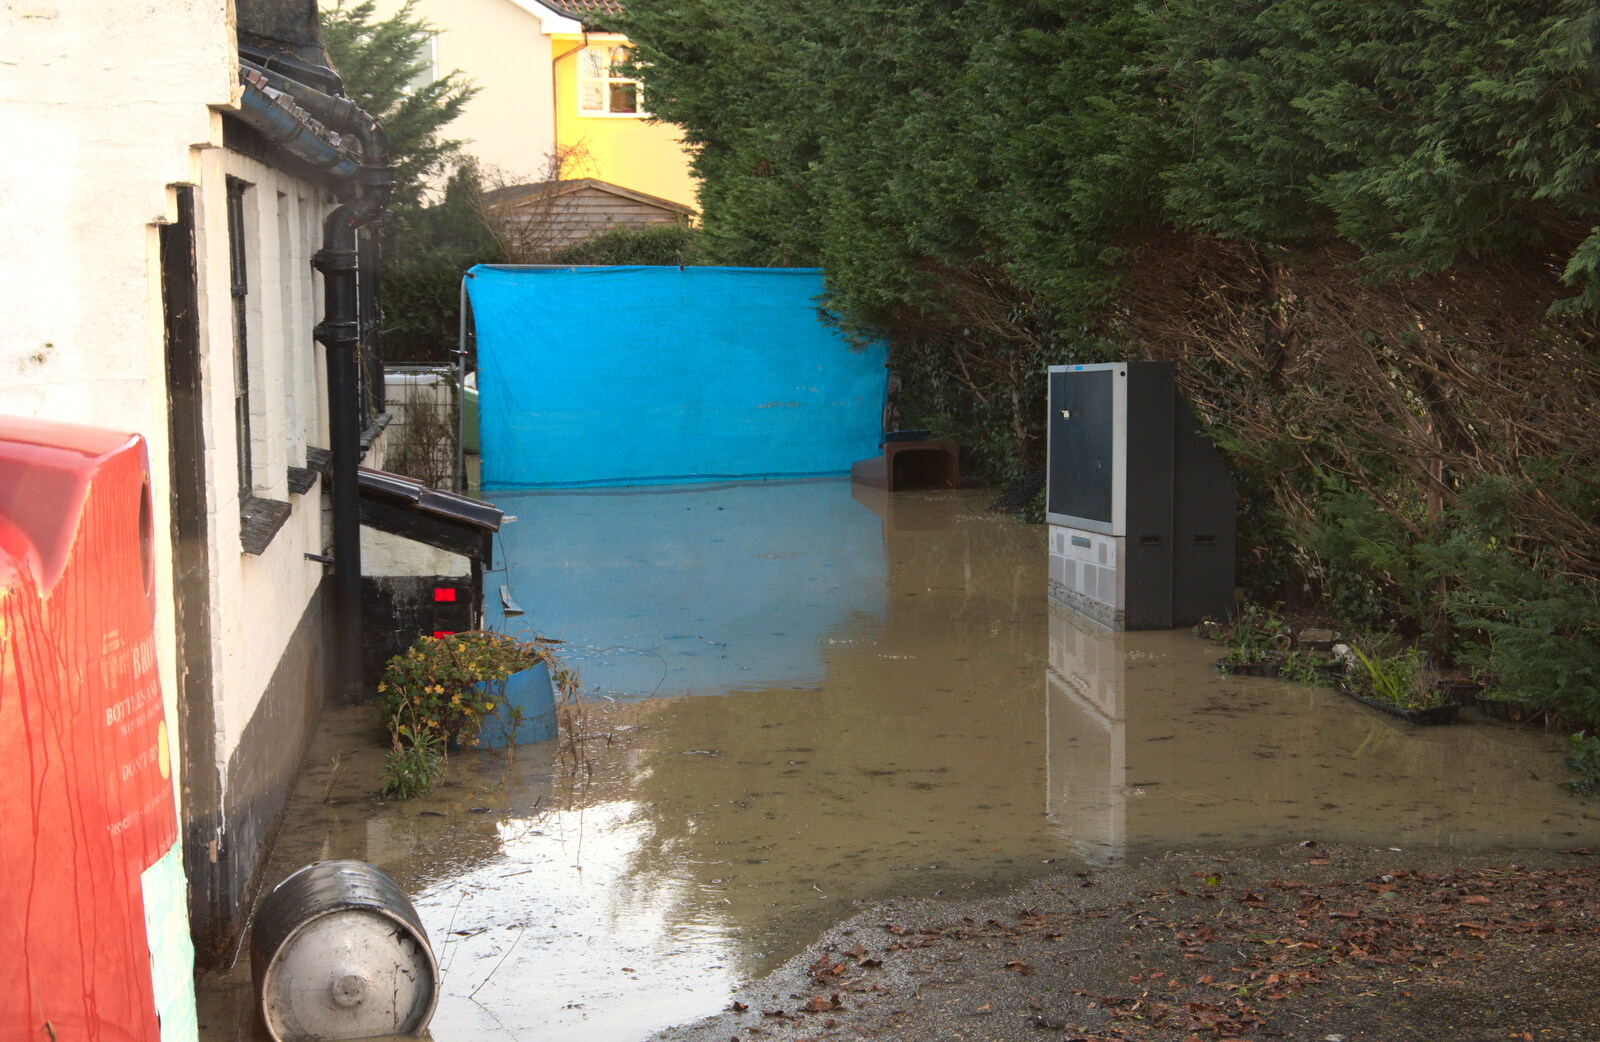 There's some sort of flooded TV from The Christmas Eve Floods, Diss, Norfolk - 24th December 2020